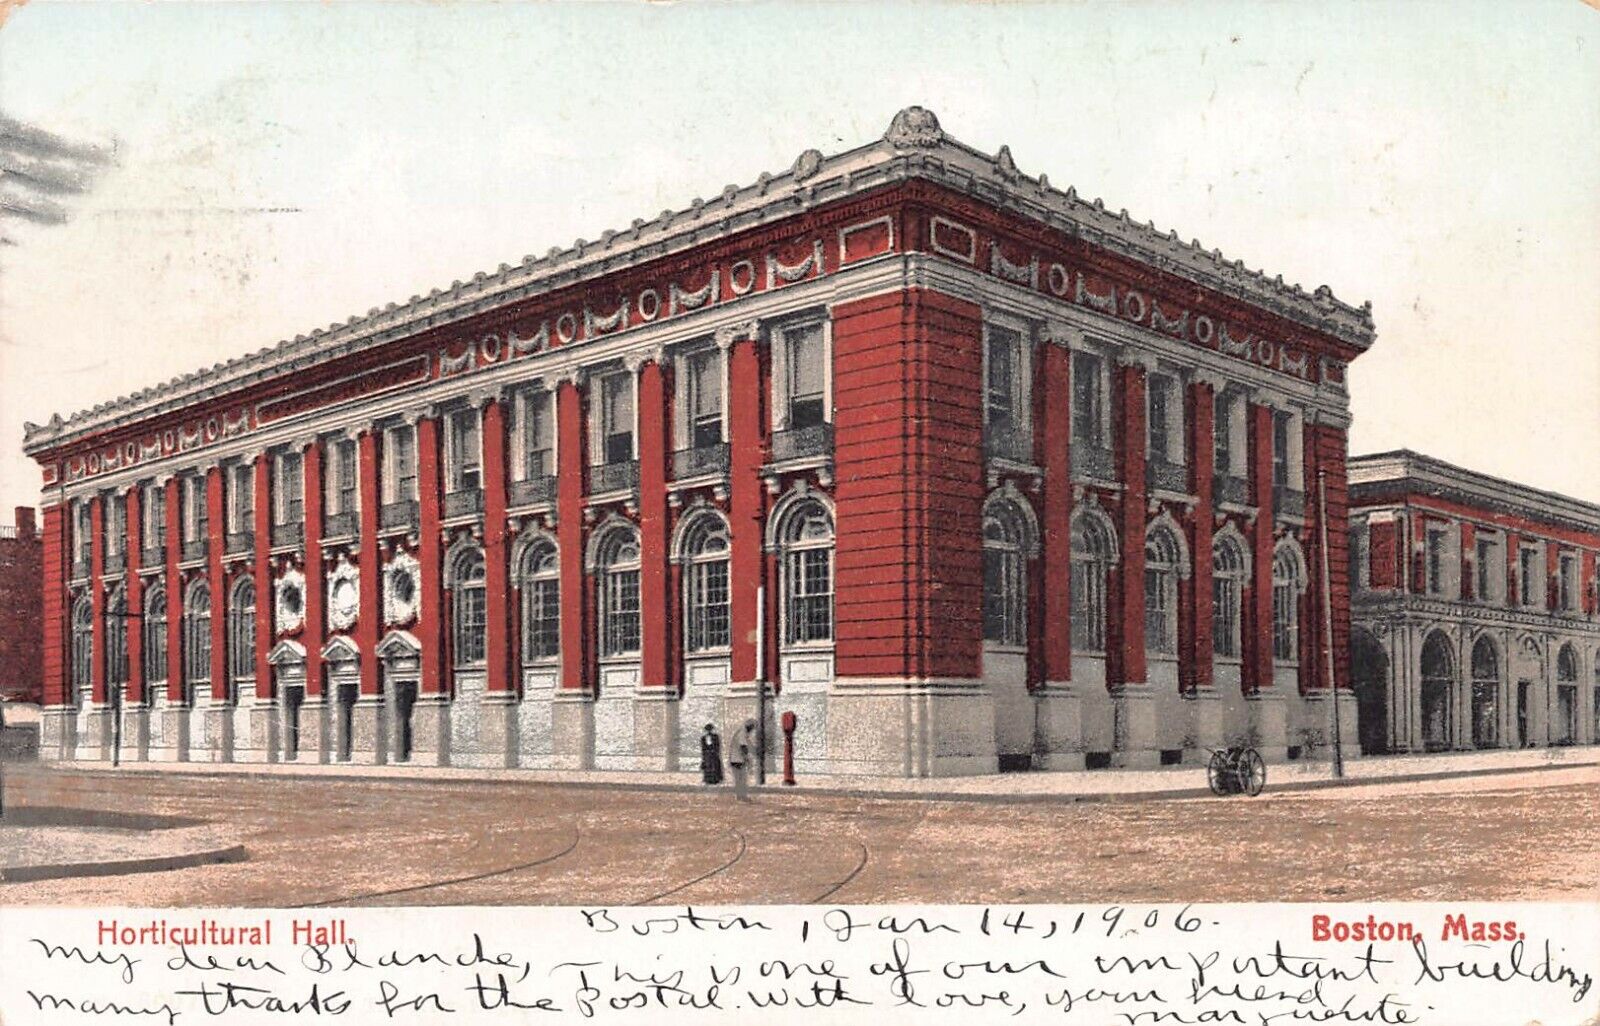 Horticultural Hall, Boston, Massachusetts, Very Early Postcard, Used in 1906